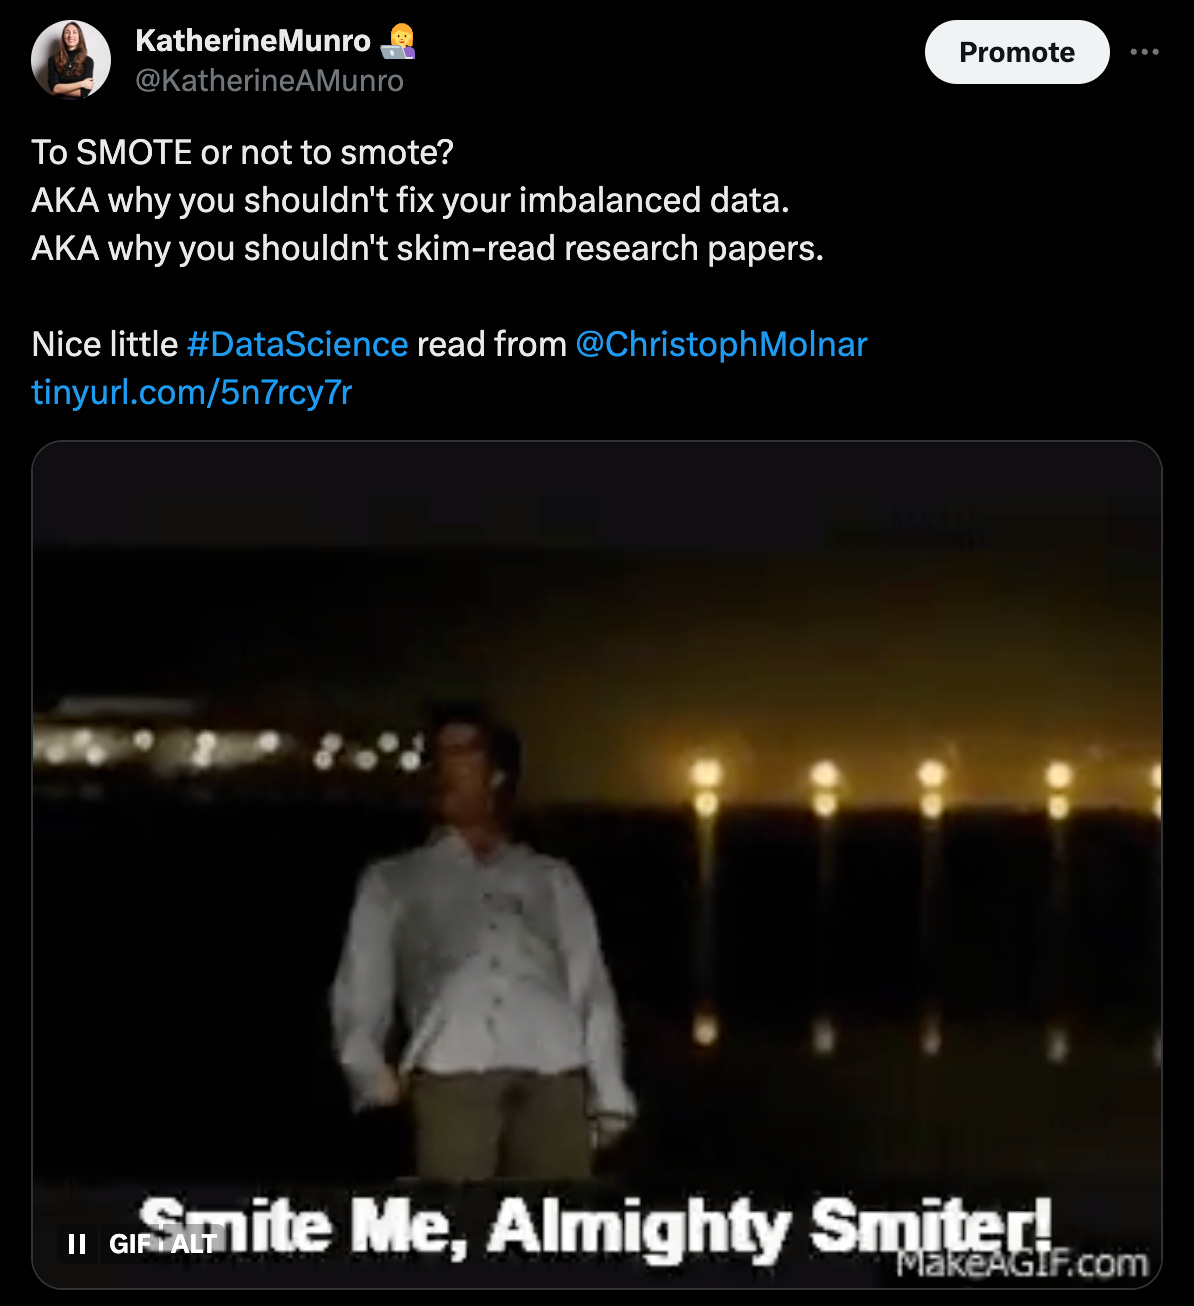 A tweet from the author, @KatherineAMunro, which reads: To SMOTE or not to smote? AKA why you shouldn't fix your imbalanced data.  AKA why you shouldn't skim-read research papers.  Nice little #DataScience read from  @ChristophMolnar   https://tinyurl.com/5n7rcy7r